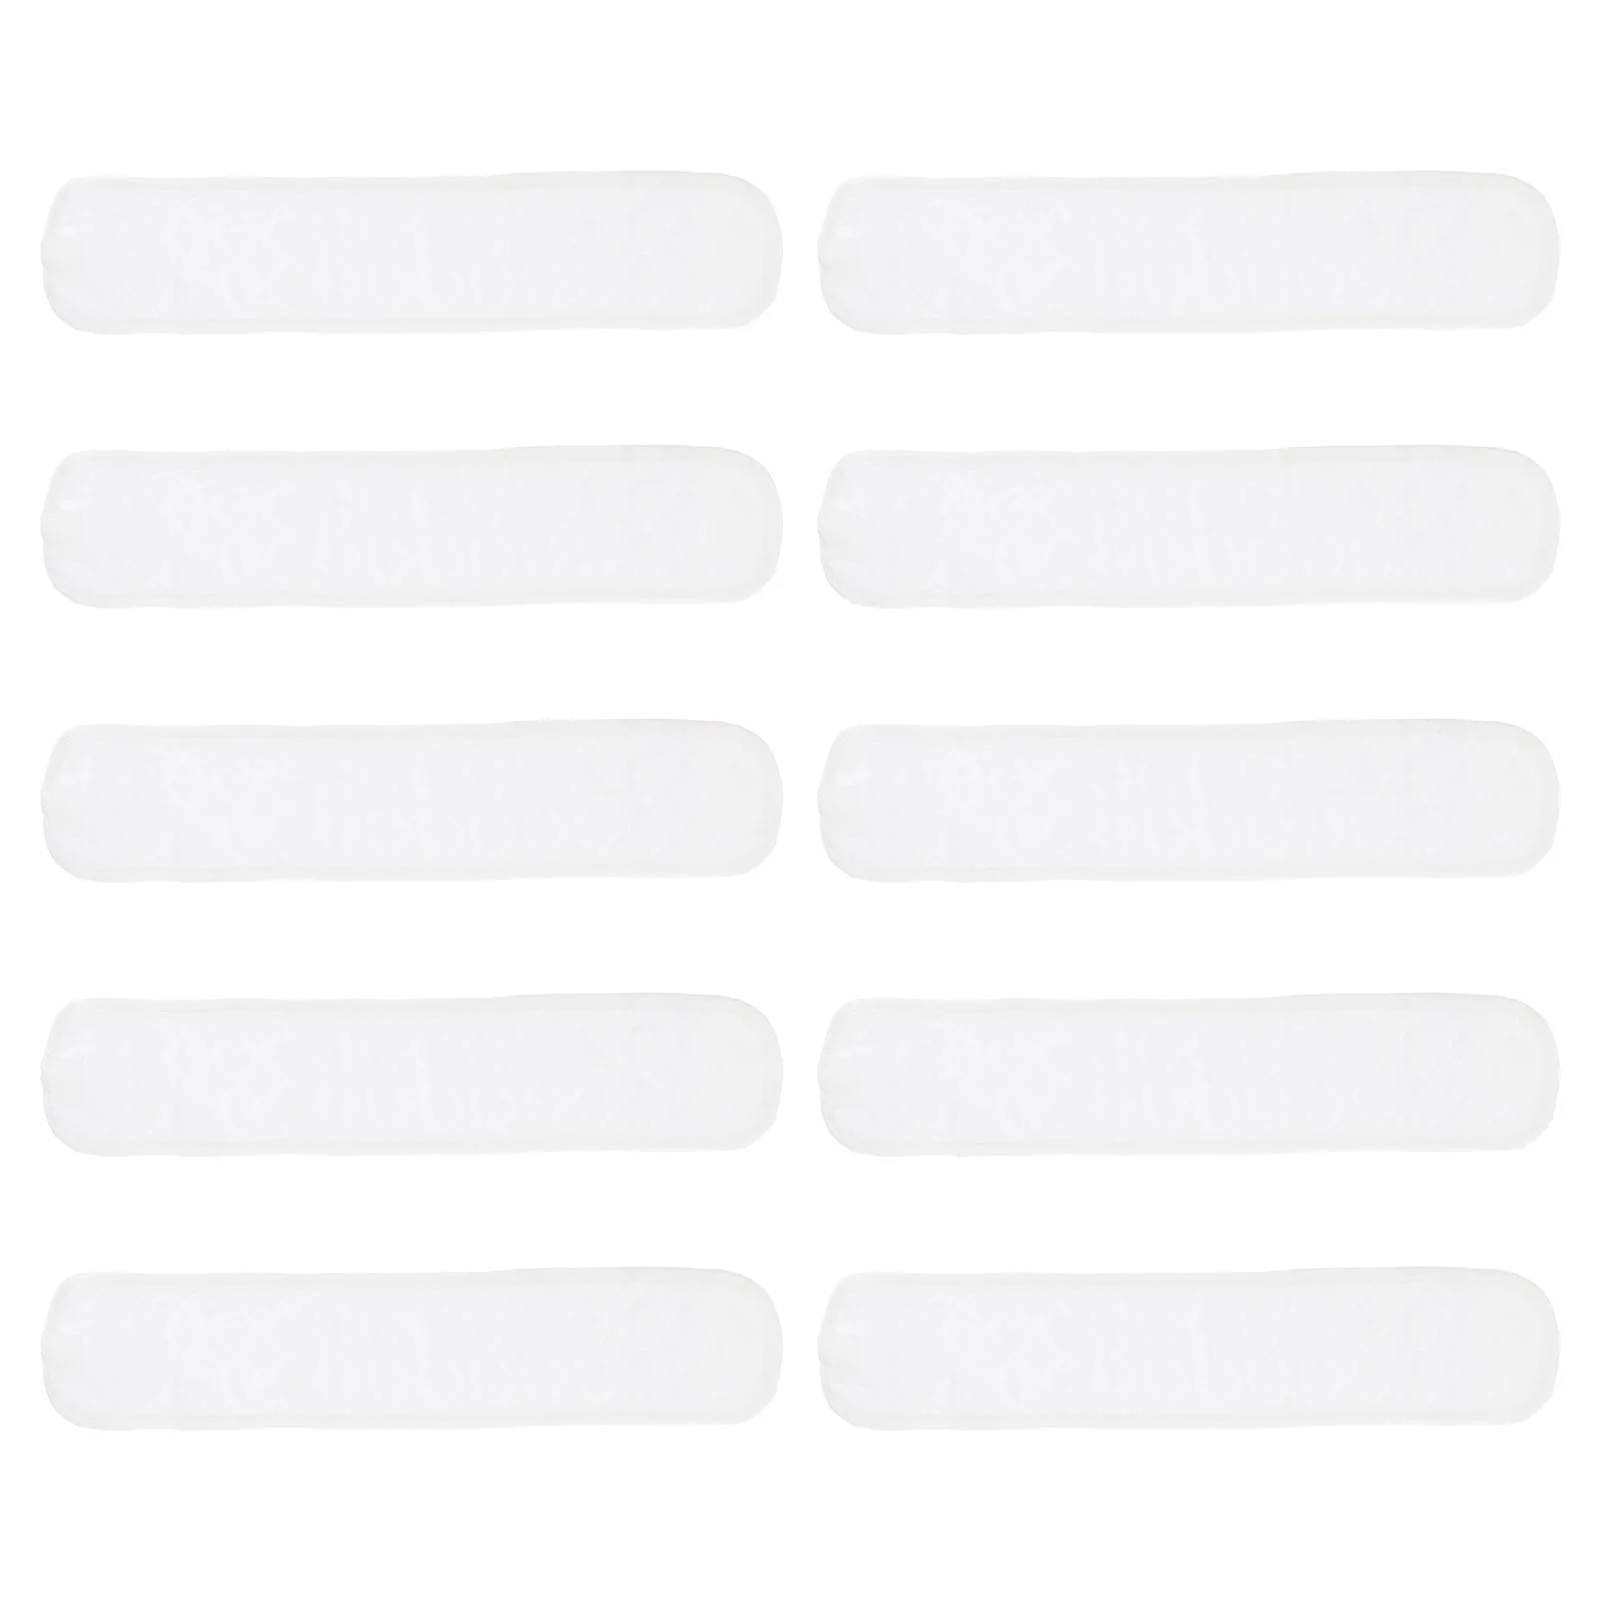 10Pcs Belly Band Infant Umbilical Cord Belt Hernia Care Cotton Navel Truss Support Newborn Essential for 0- 12 Months 4pcs baby belly band infant umbilical belt newborn navel hernia truss beltbutton protector bellyband infant care navel guard